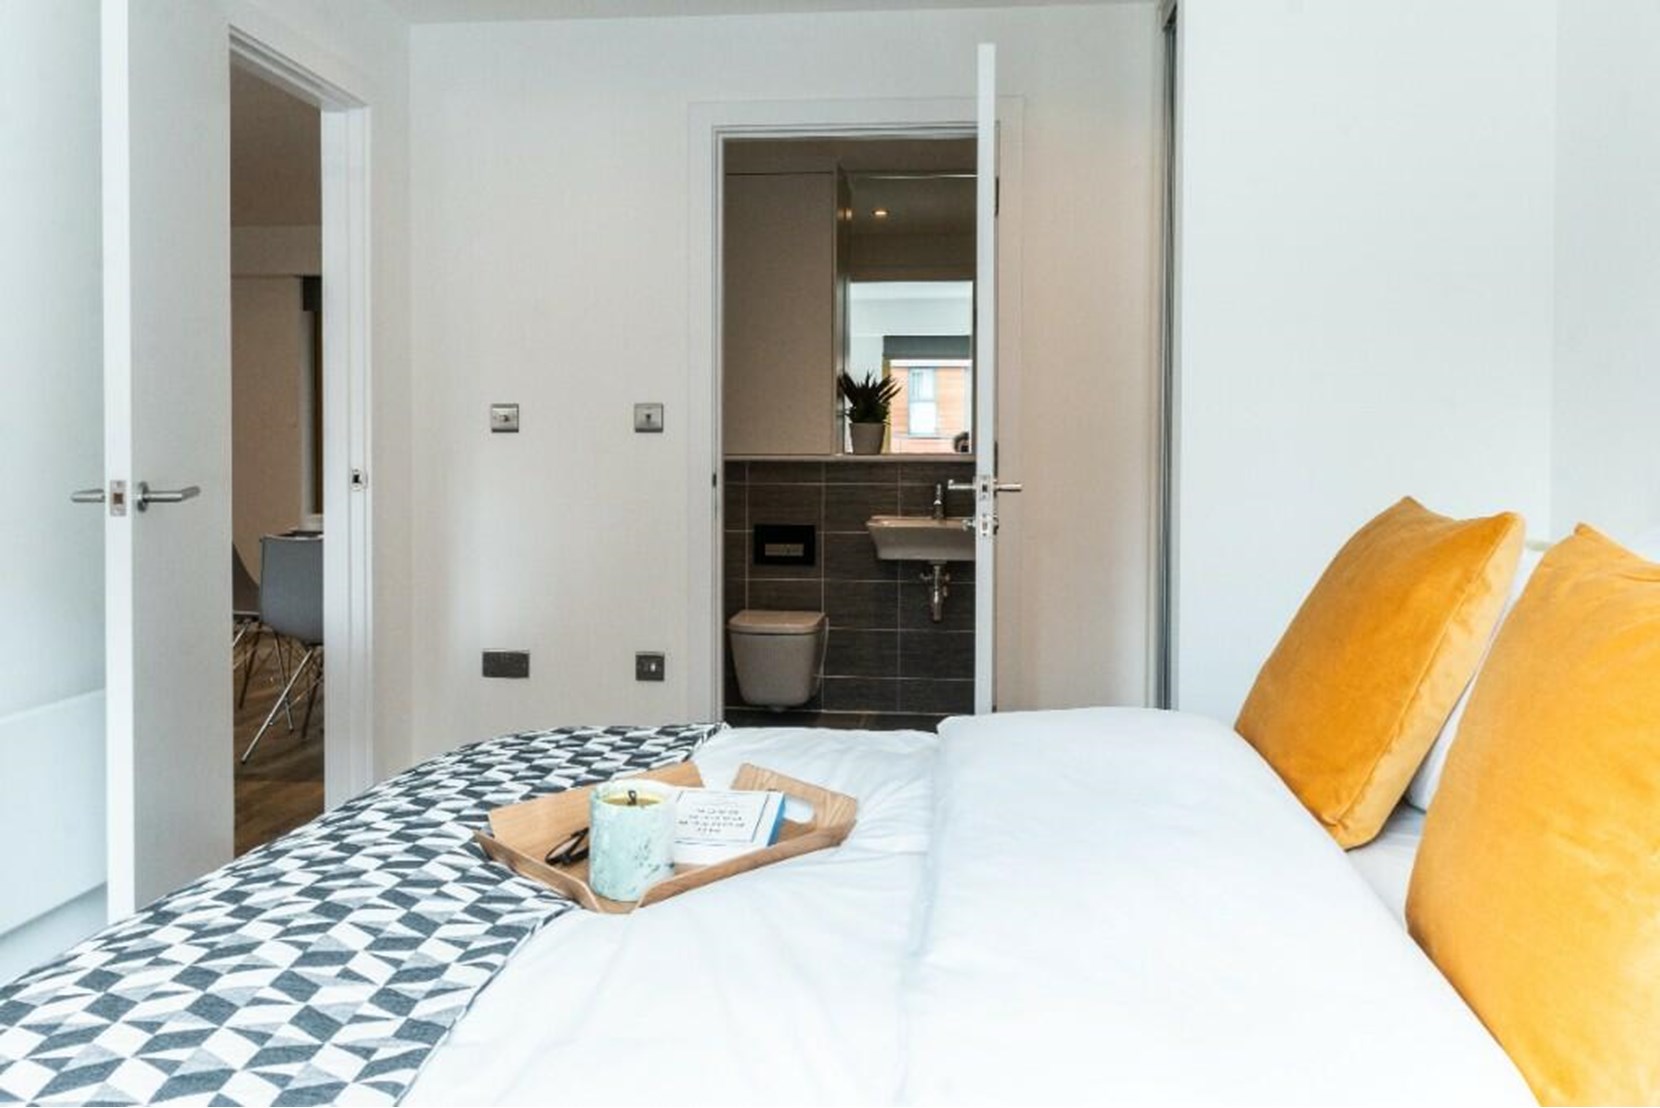 Apartments to Rent by Savills at The Astley, Manchester, M1, bedroom